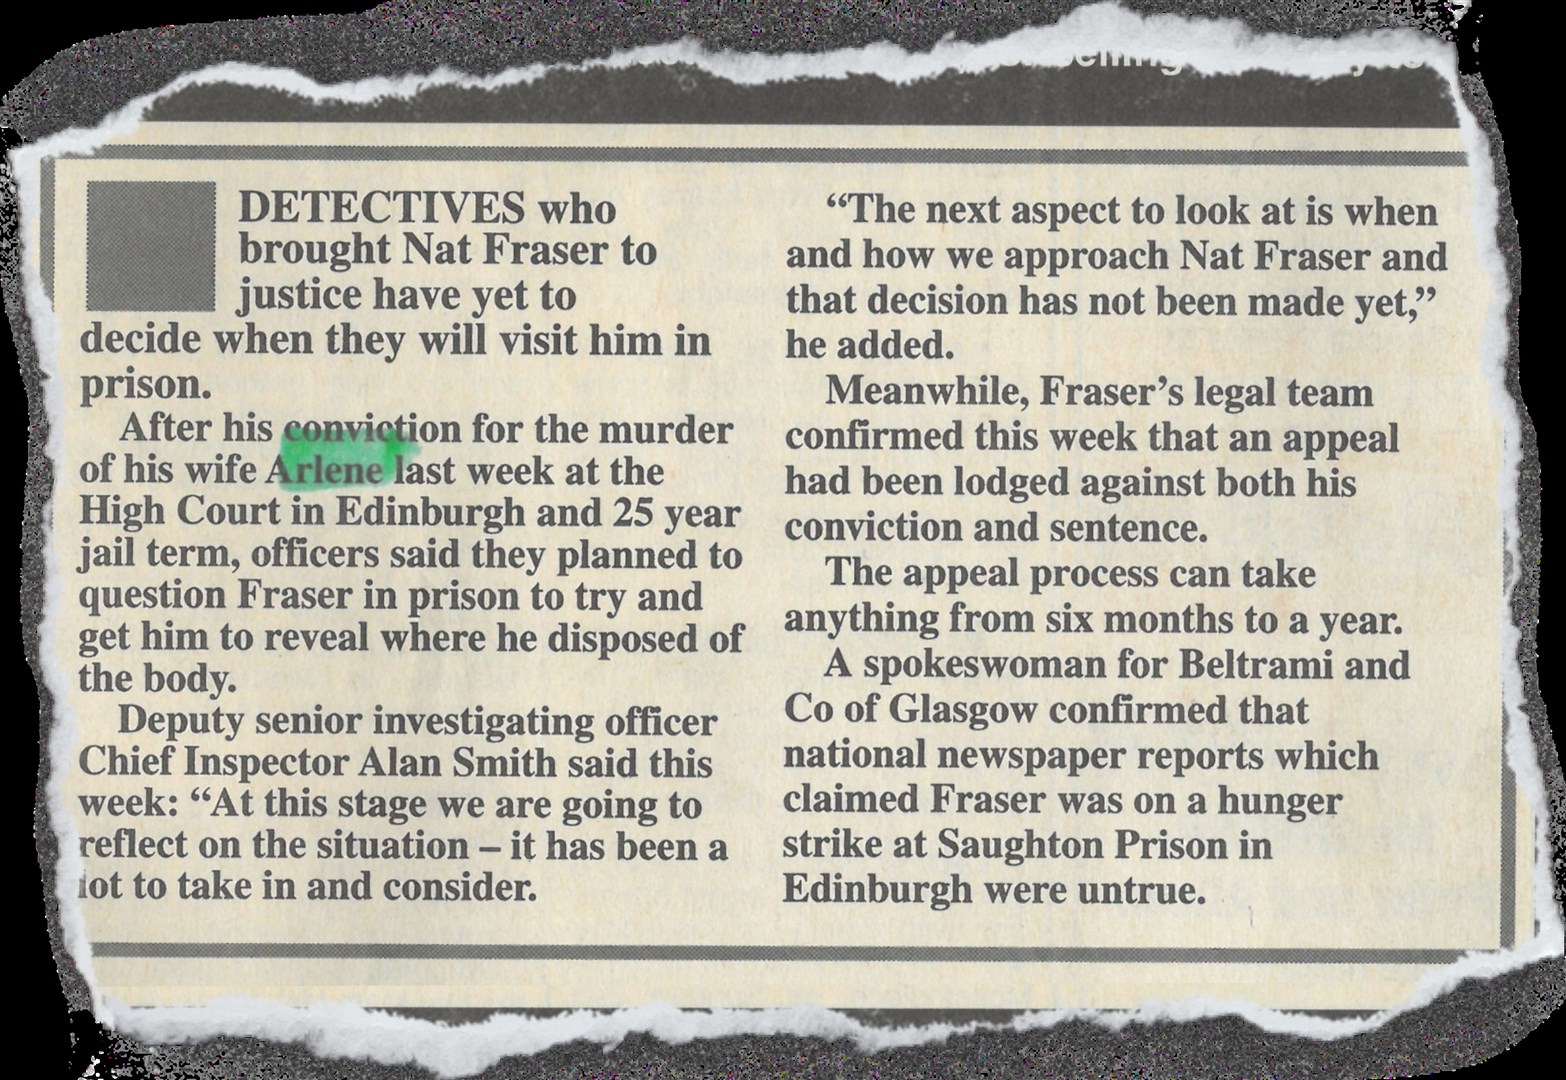 This story appeared in the Northern Scot, February 7, 2003...Picture: Northern Scot